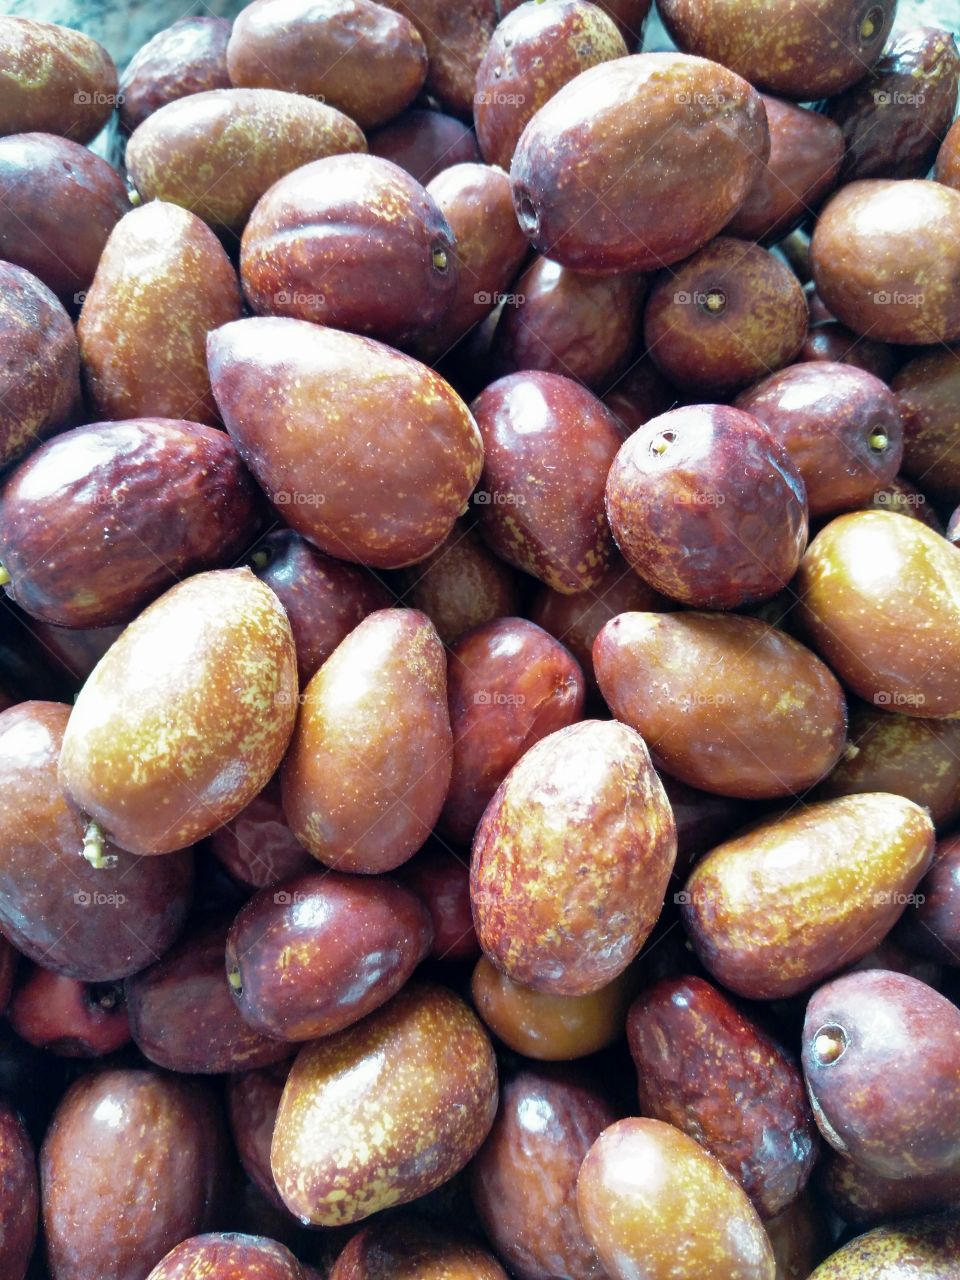 a quantity of brown jujubes fuits just picked up from the tree